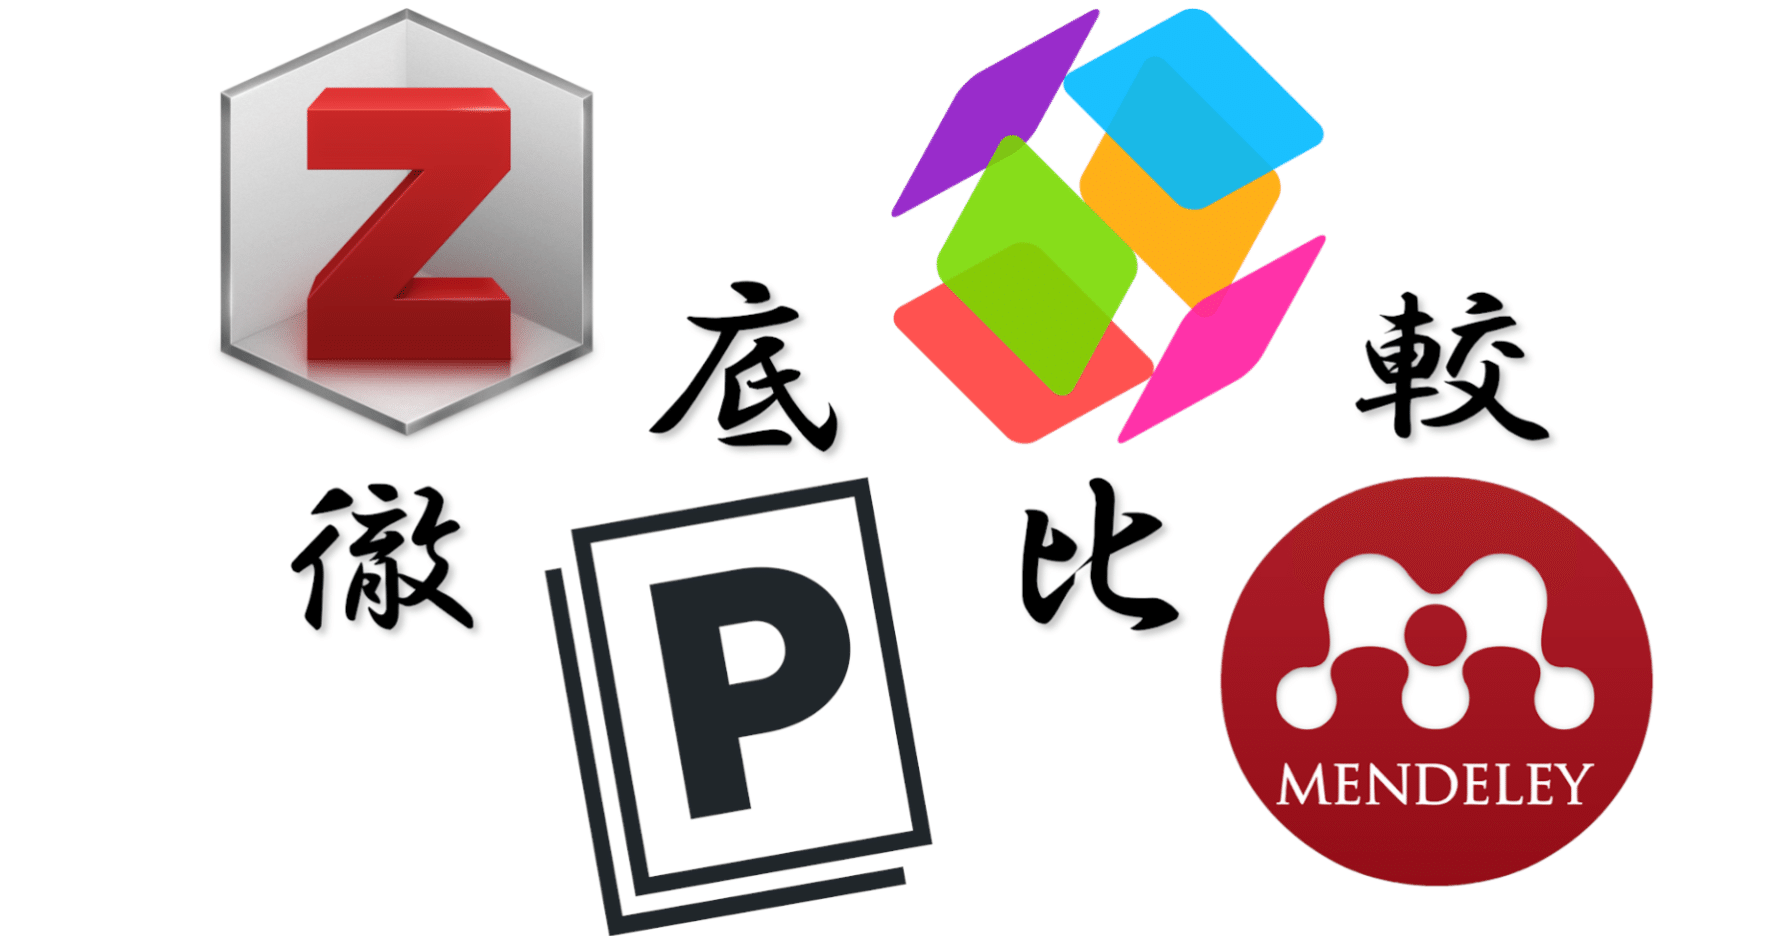 Endnoteは買いたくないあなたへ捧ぐ 文献管理ソフト徹底比較 Zotero Mendeley Readcube Papers Paperpile Sd Note